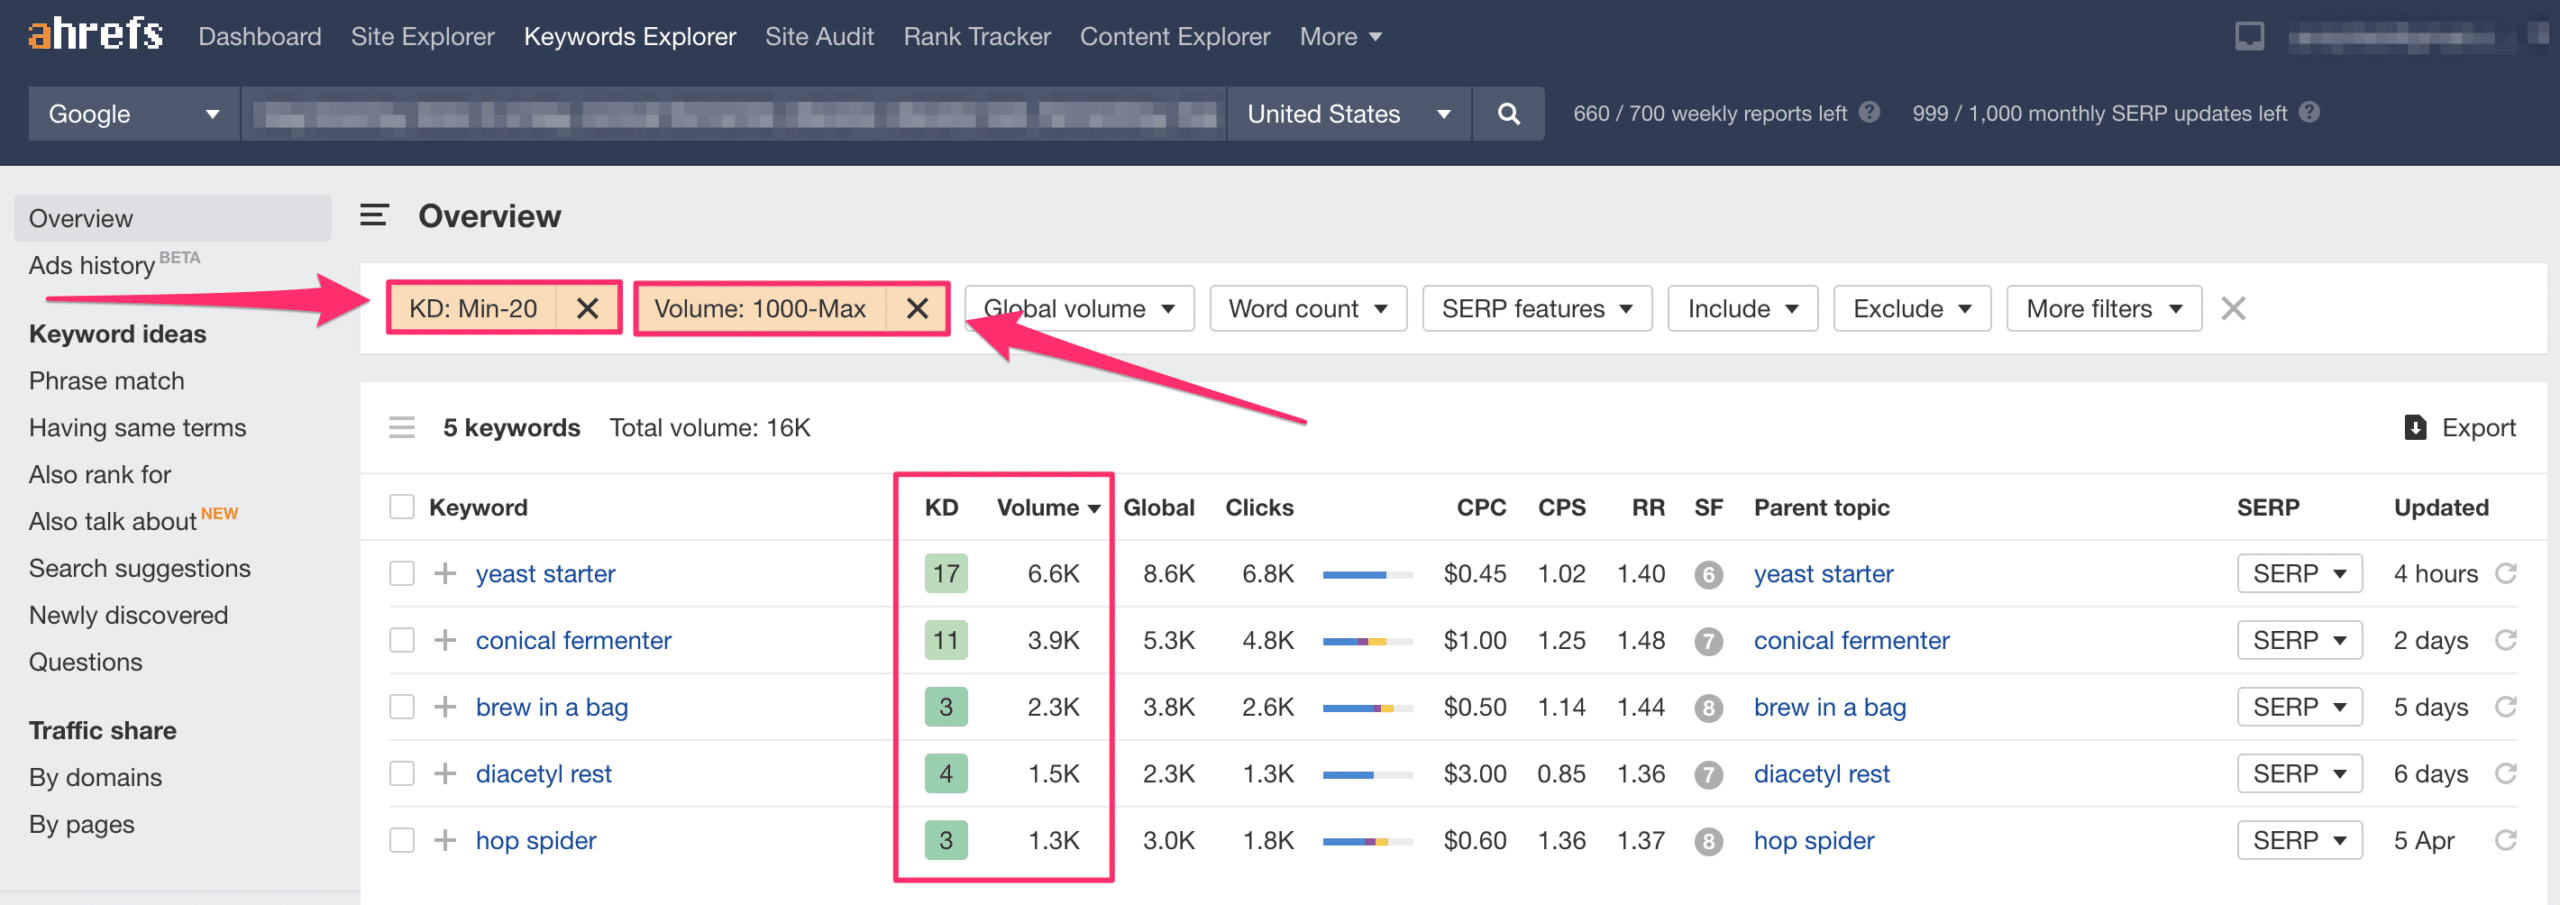 ahrefs keyword explorer setting filters low kd score and high search volume